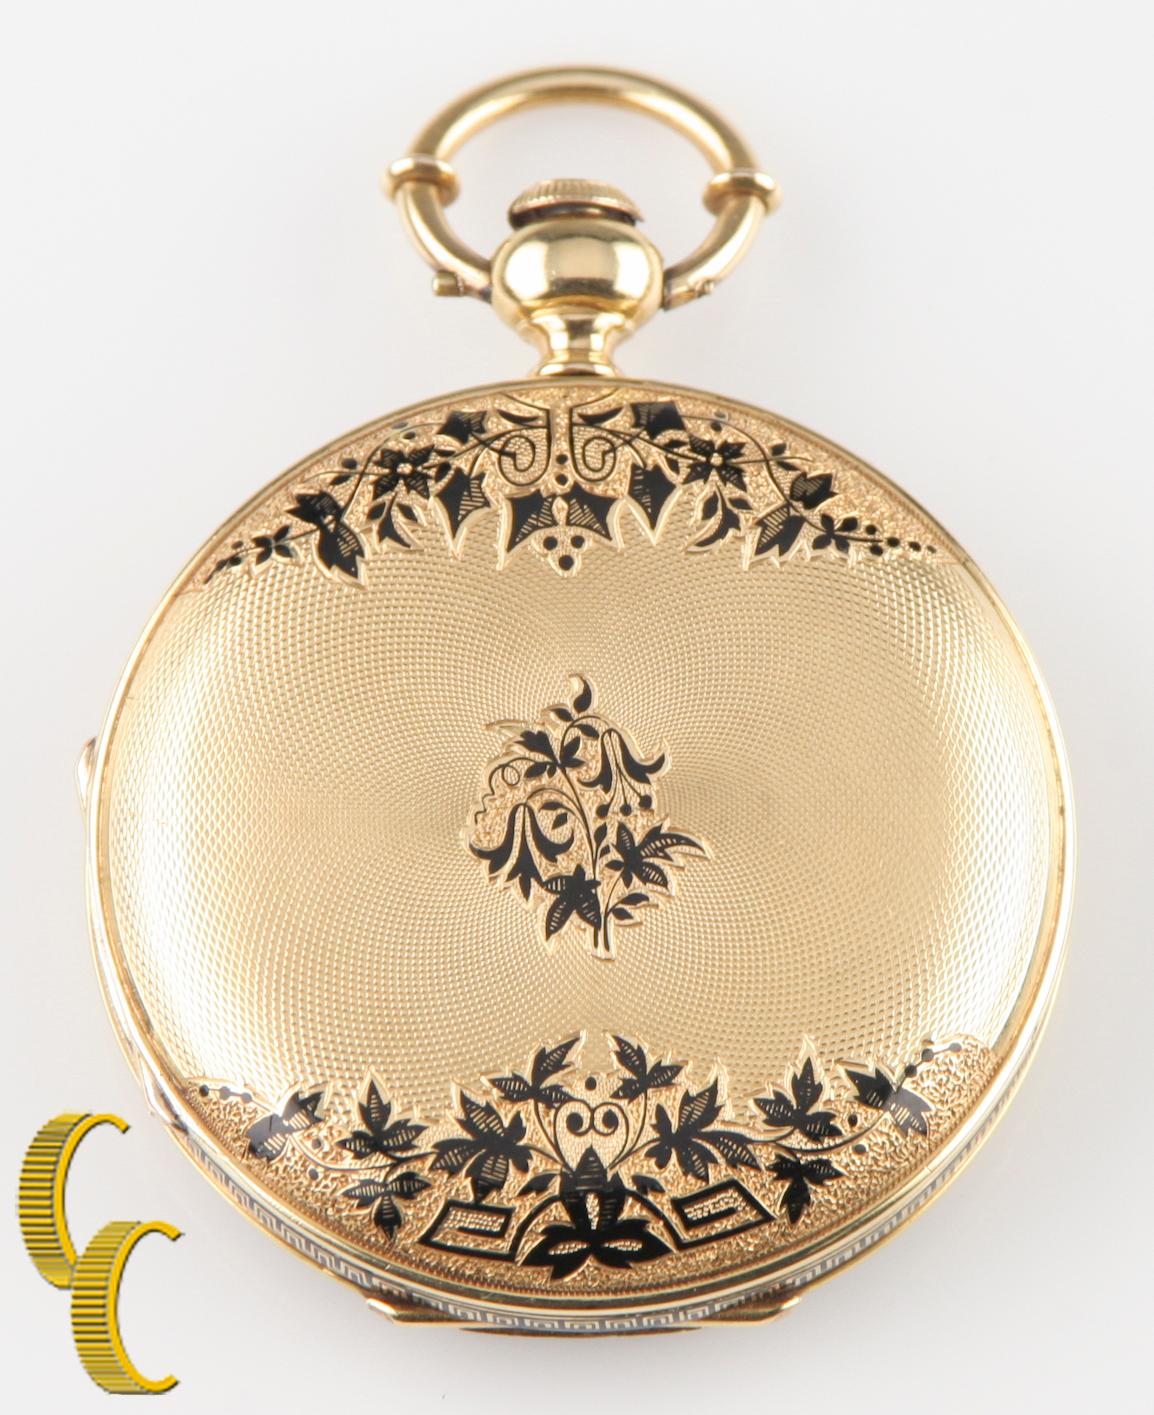 Beautiful Antique Emile Jacot Locle Pocket Watch w/ Ornate Black Hands & Dedicated Second Dial
18k Solid Gold Case w/ Beautiful Black Enamel Engraving on Both Sides
Black Arabic Numerals
Case Serial #38277 (Hallmarked 